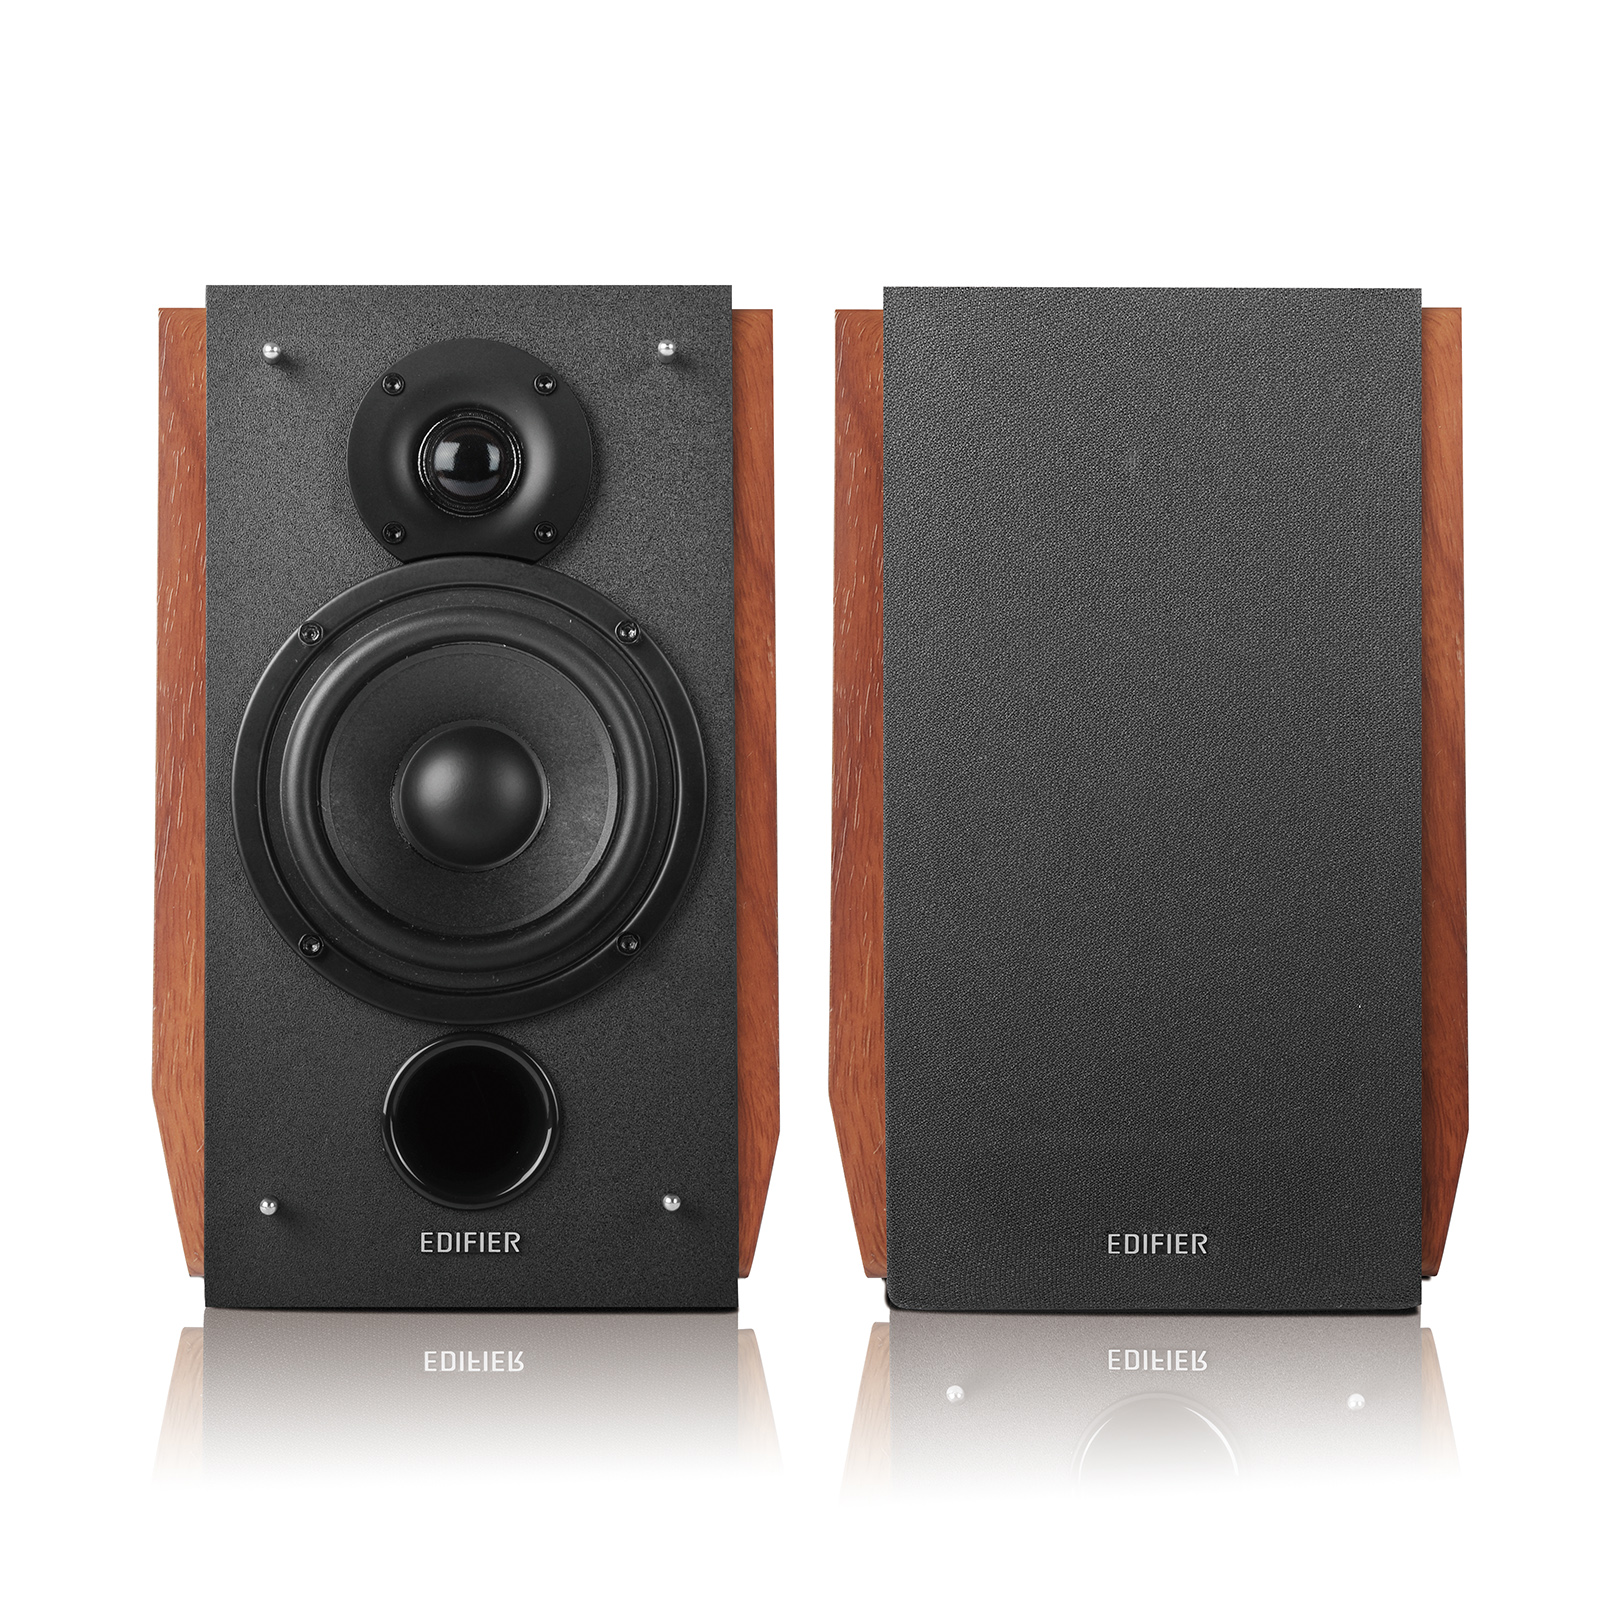 Edifier R1700BTs Active Bookshelf Speakers - Bluetooth v5.0, 2.0 Wireless Near Field Studio Monitor Speaker - 66w RMS with Subwoofer Line Out - Wooden Enclosure - image 4 of 7